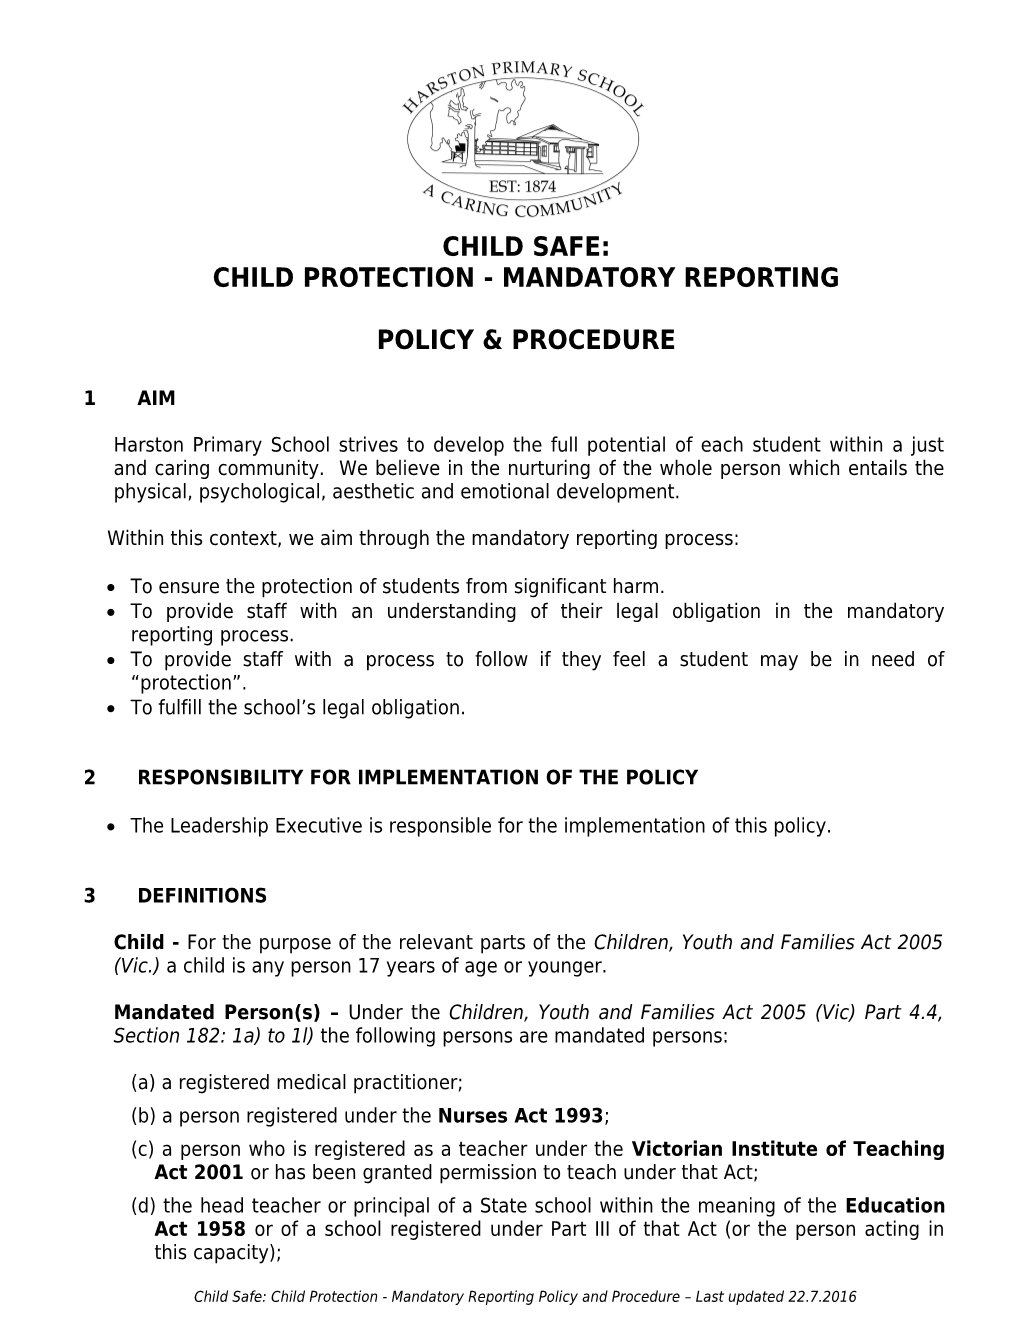 Child Protection - Mandatory Reporting